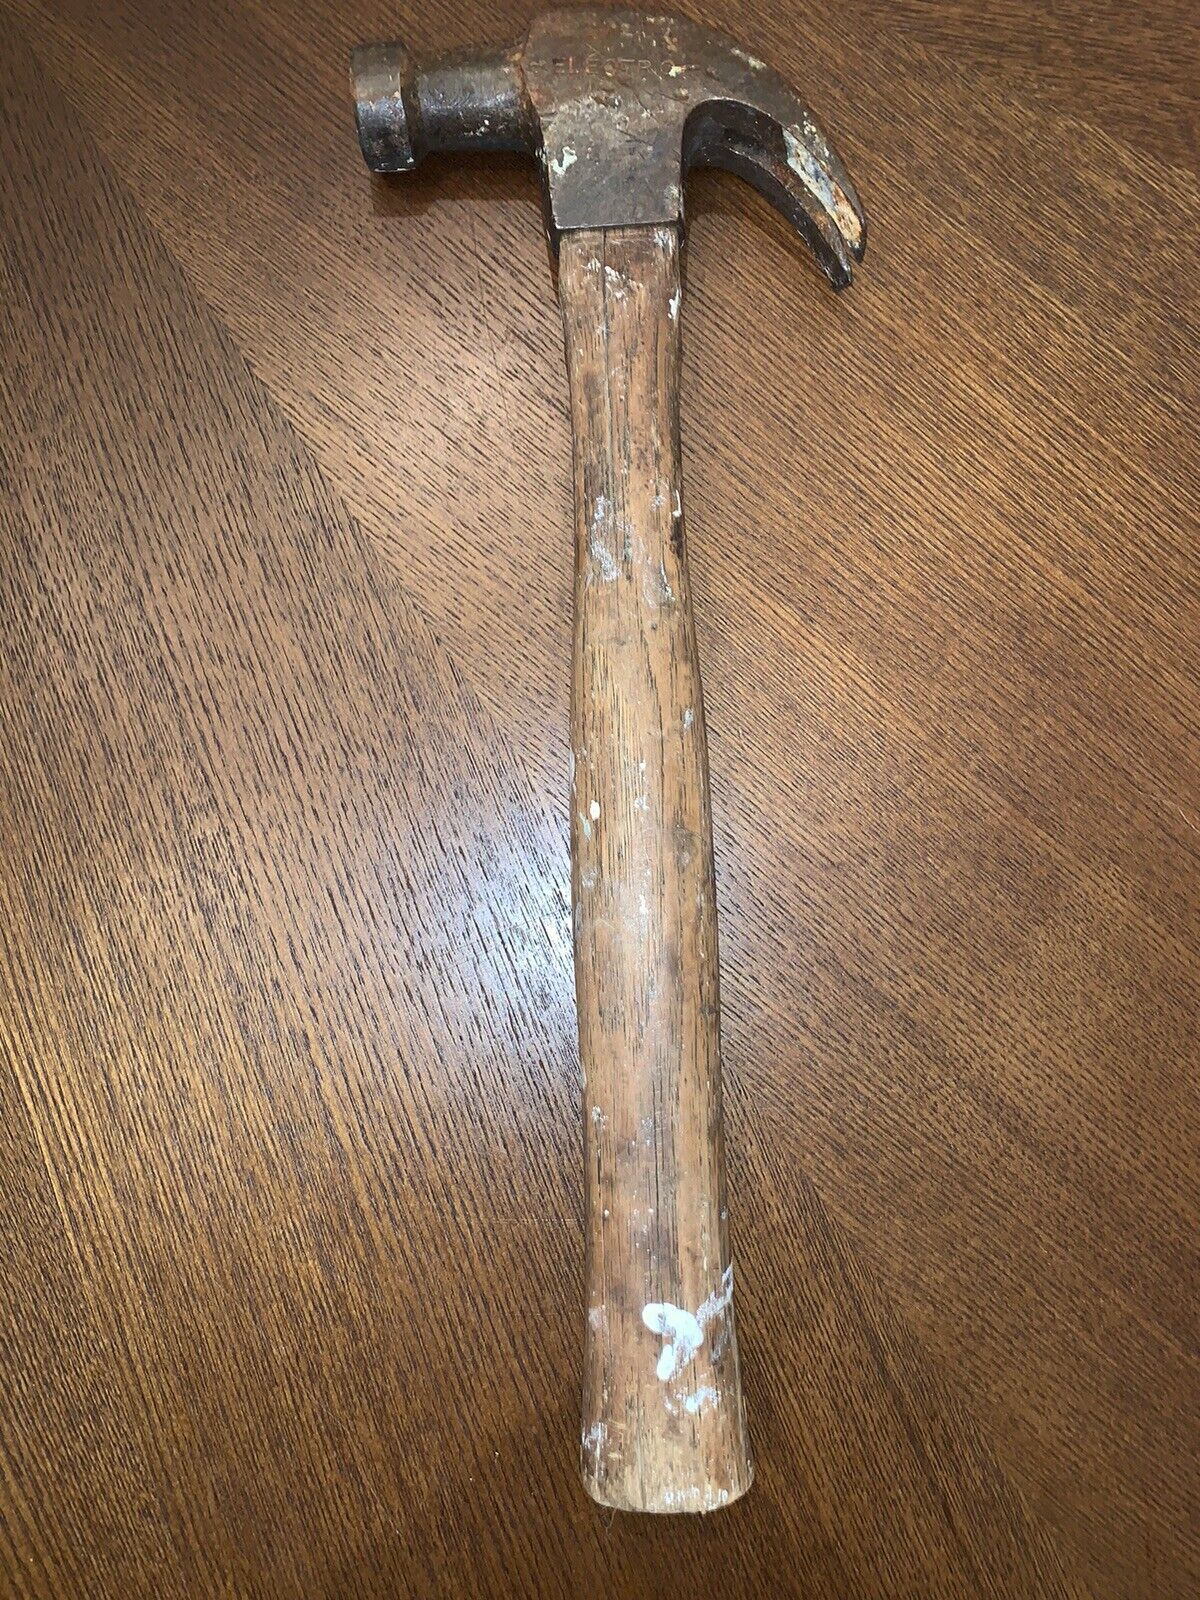 RARE Antique Tools Claw Peen Hammer Vintage Stamped “ Electric” Carpentry